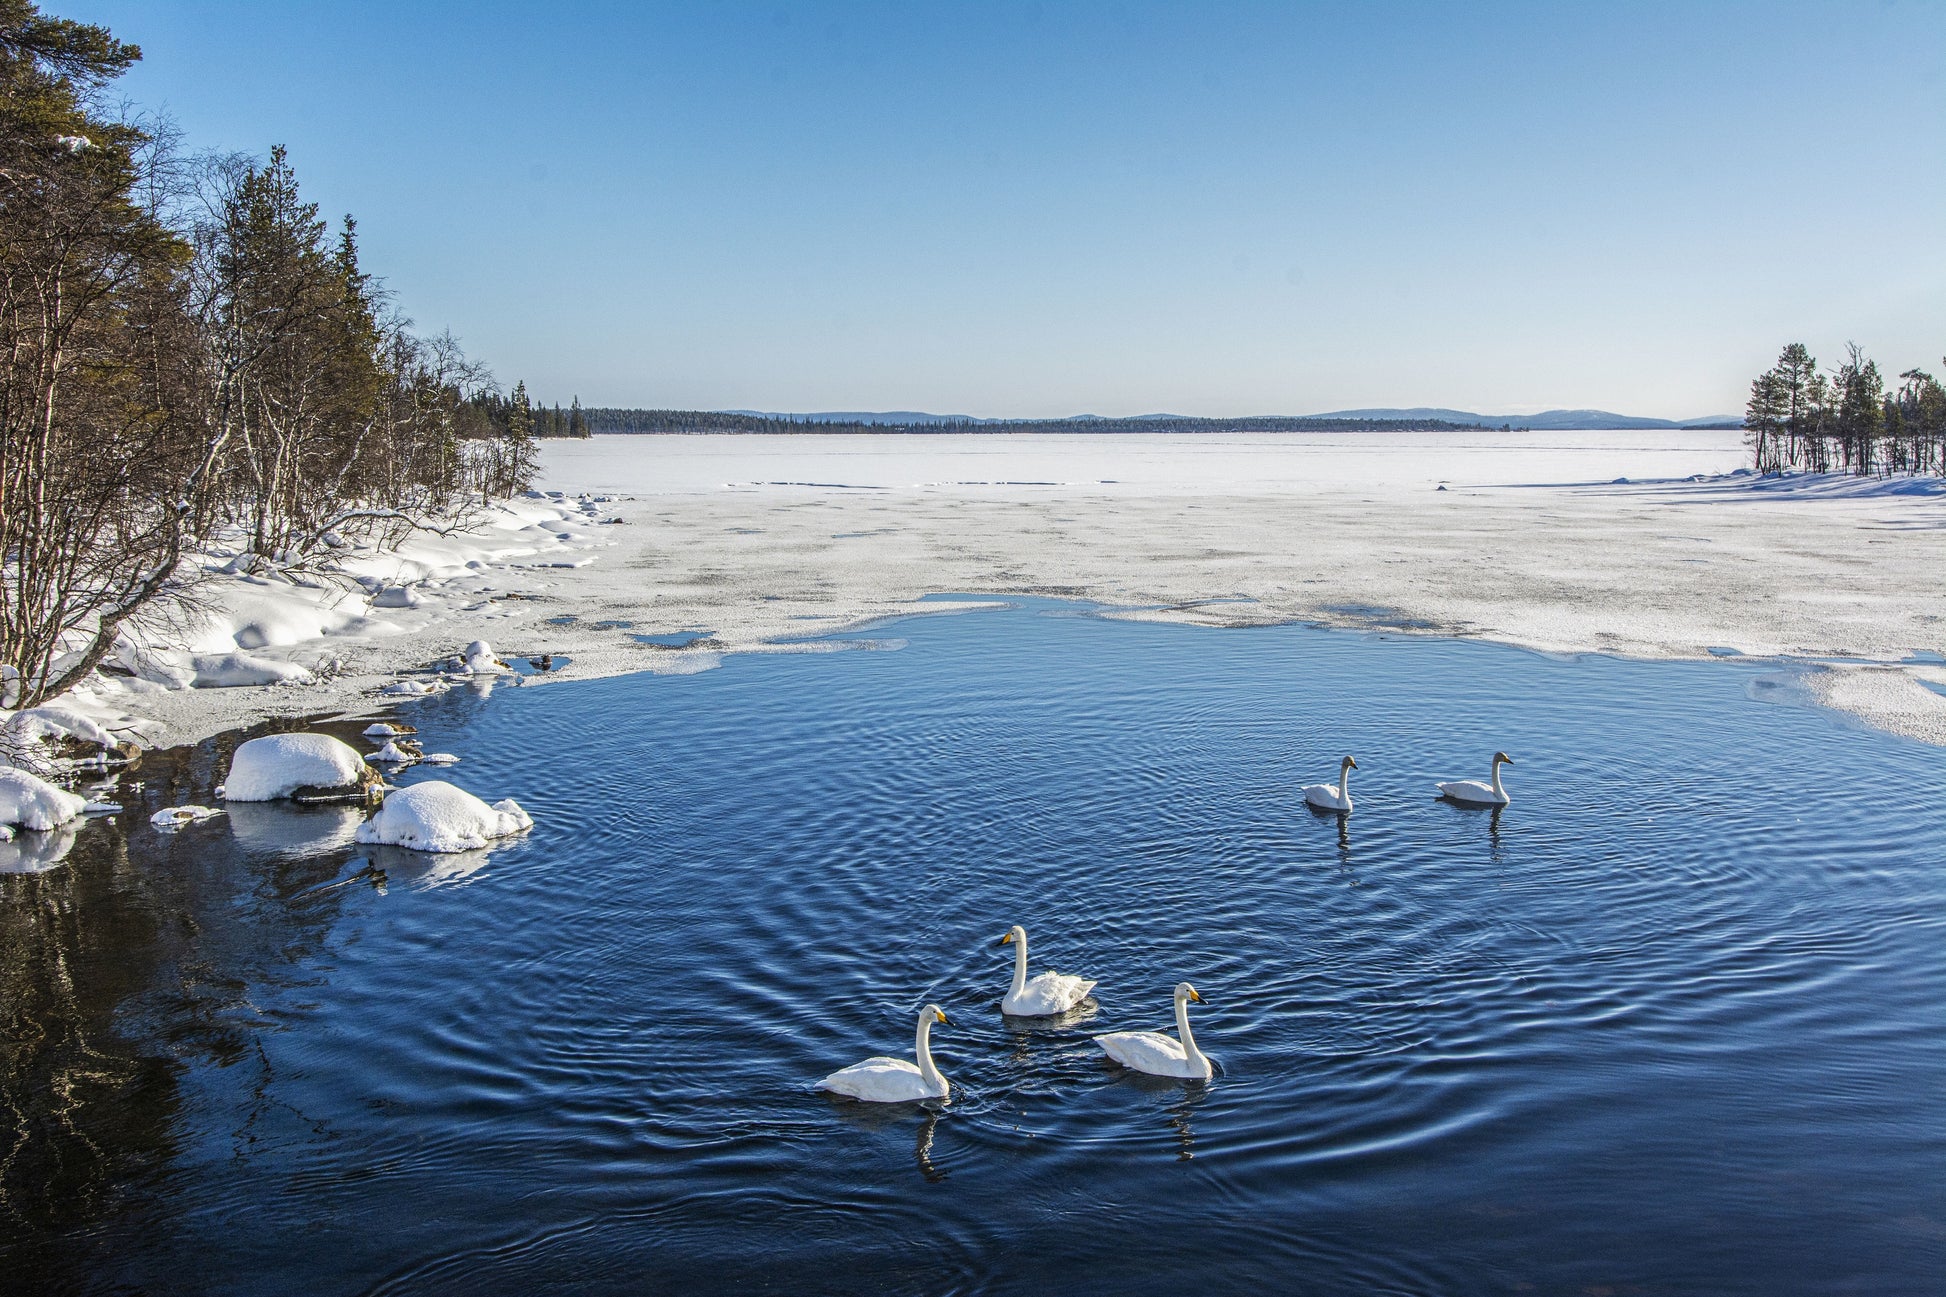 Alessandra Mattanza | CURIOSITY OF SWANS, Lapland, Finland. Whooper Swans, Finlands national bird, explore an icy lake in Lapland. Available as an art print or as a photographic print on acrylic glass.